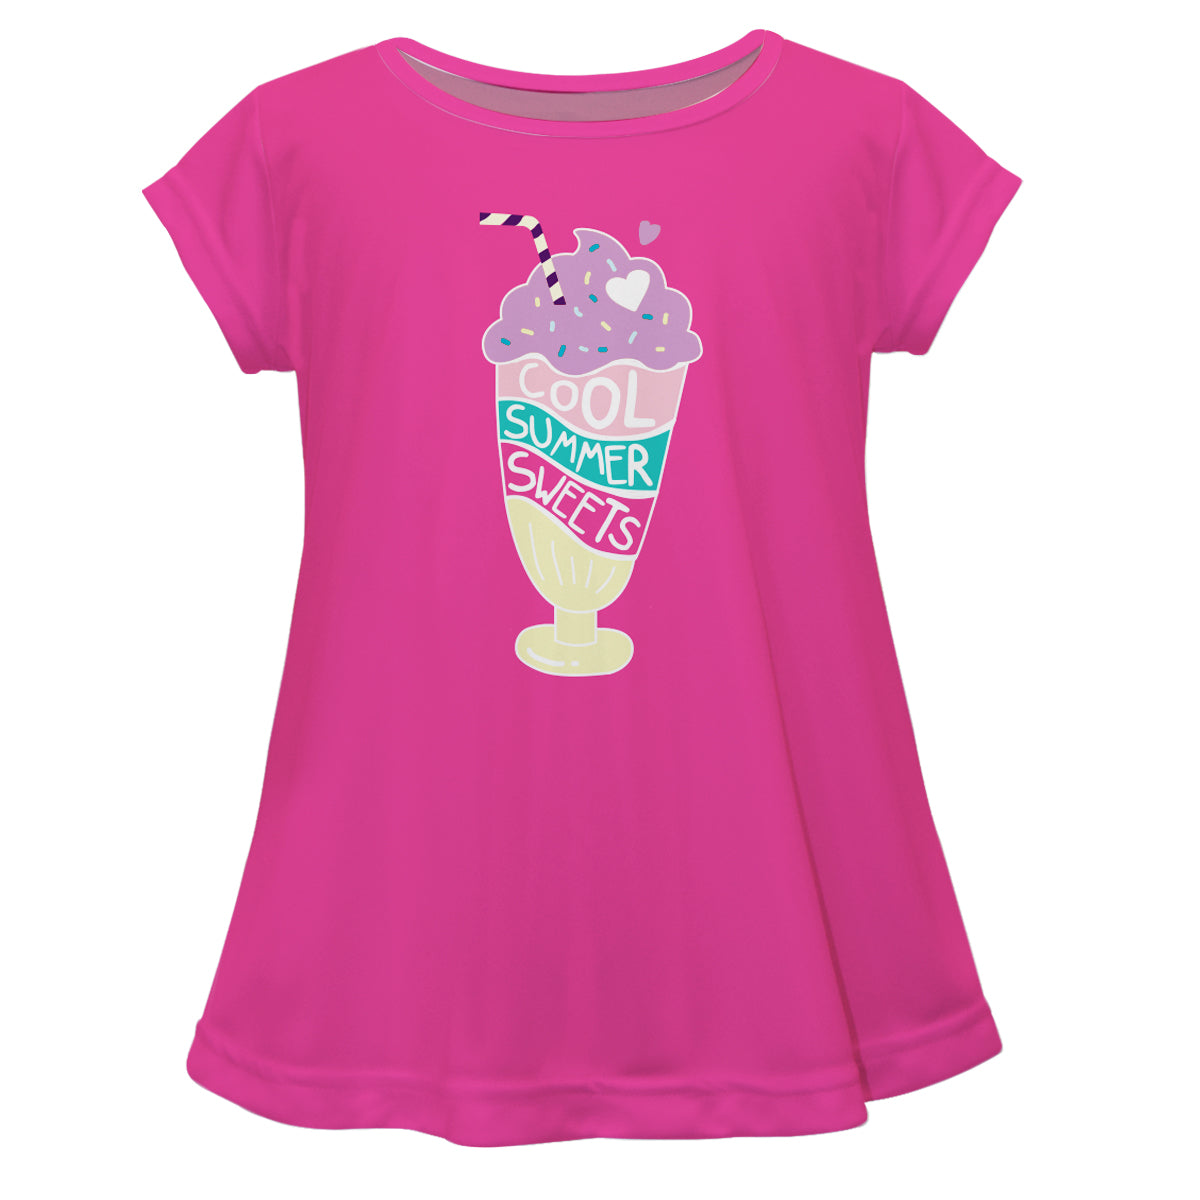 Cool Summer Sweets Pink Short Sleeve Laurie Top